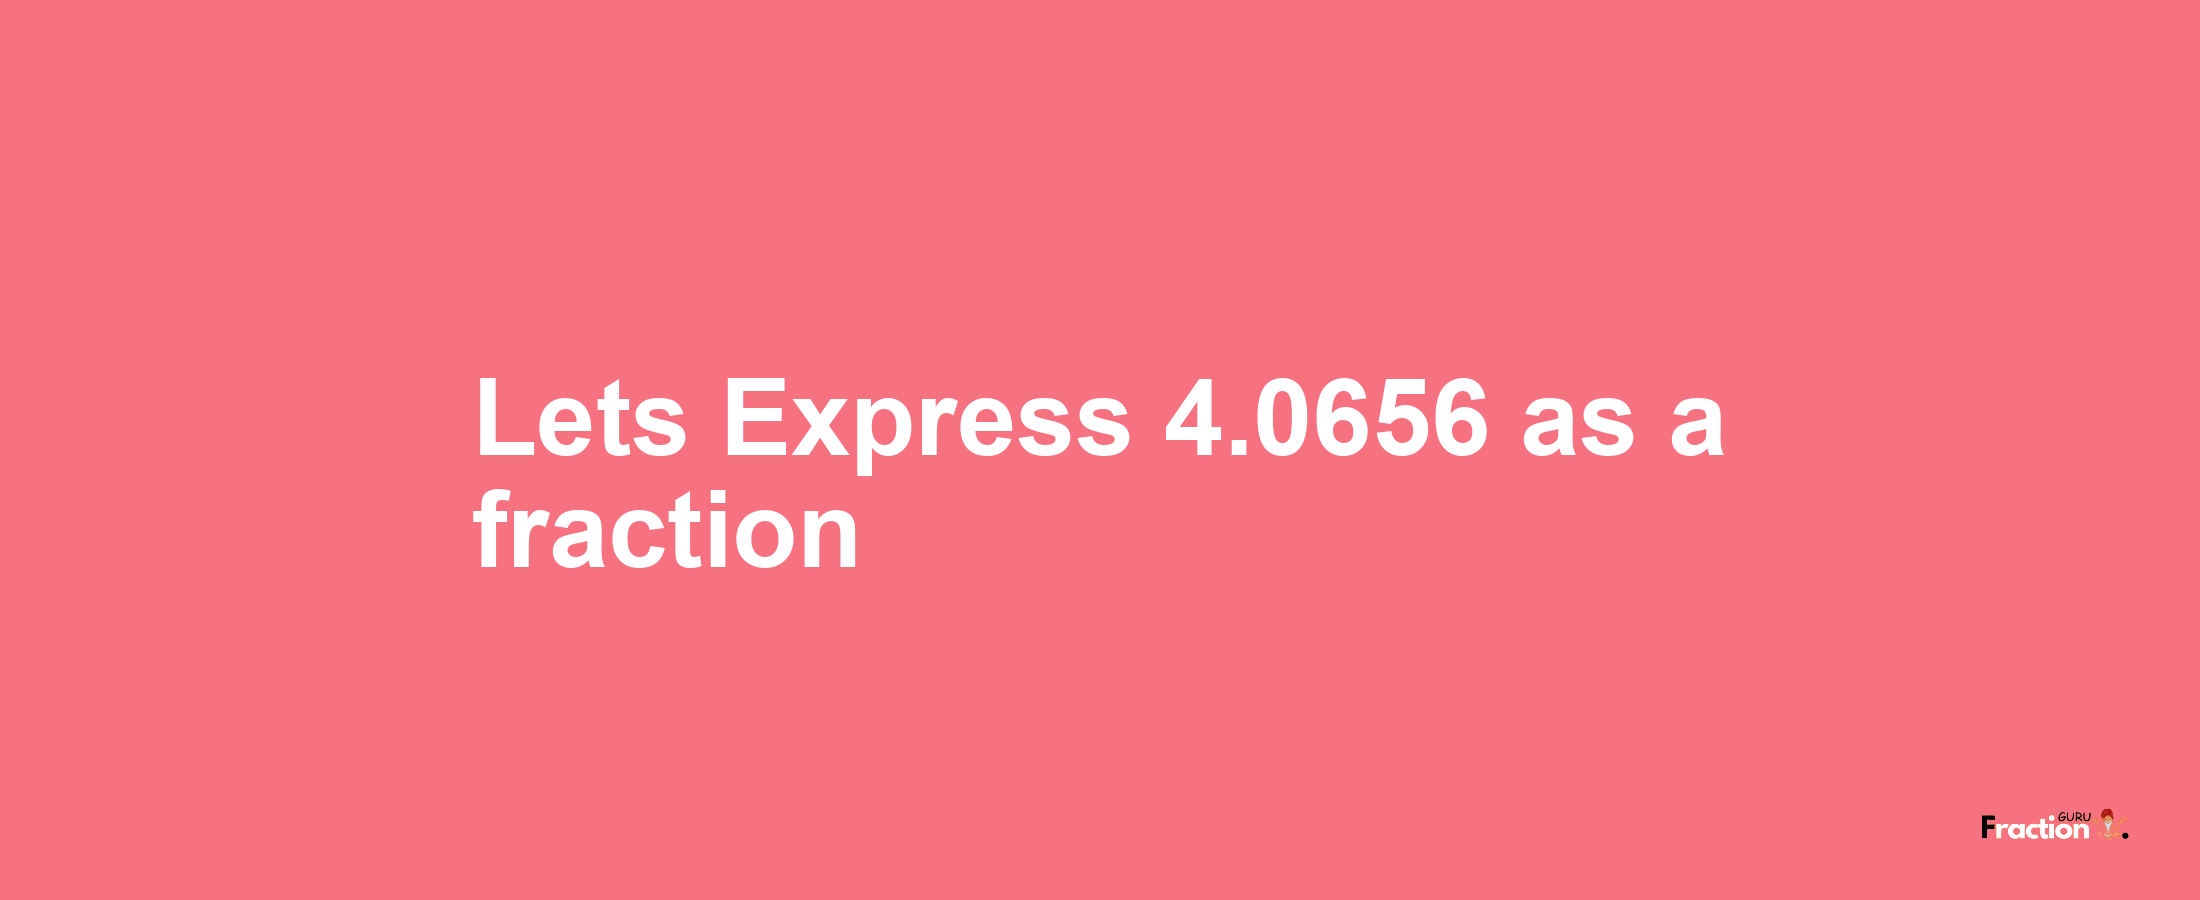 Lets Express 4.0656 as afraction